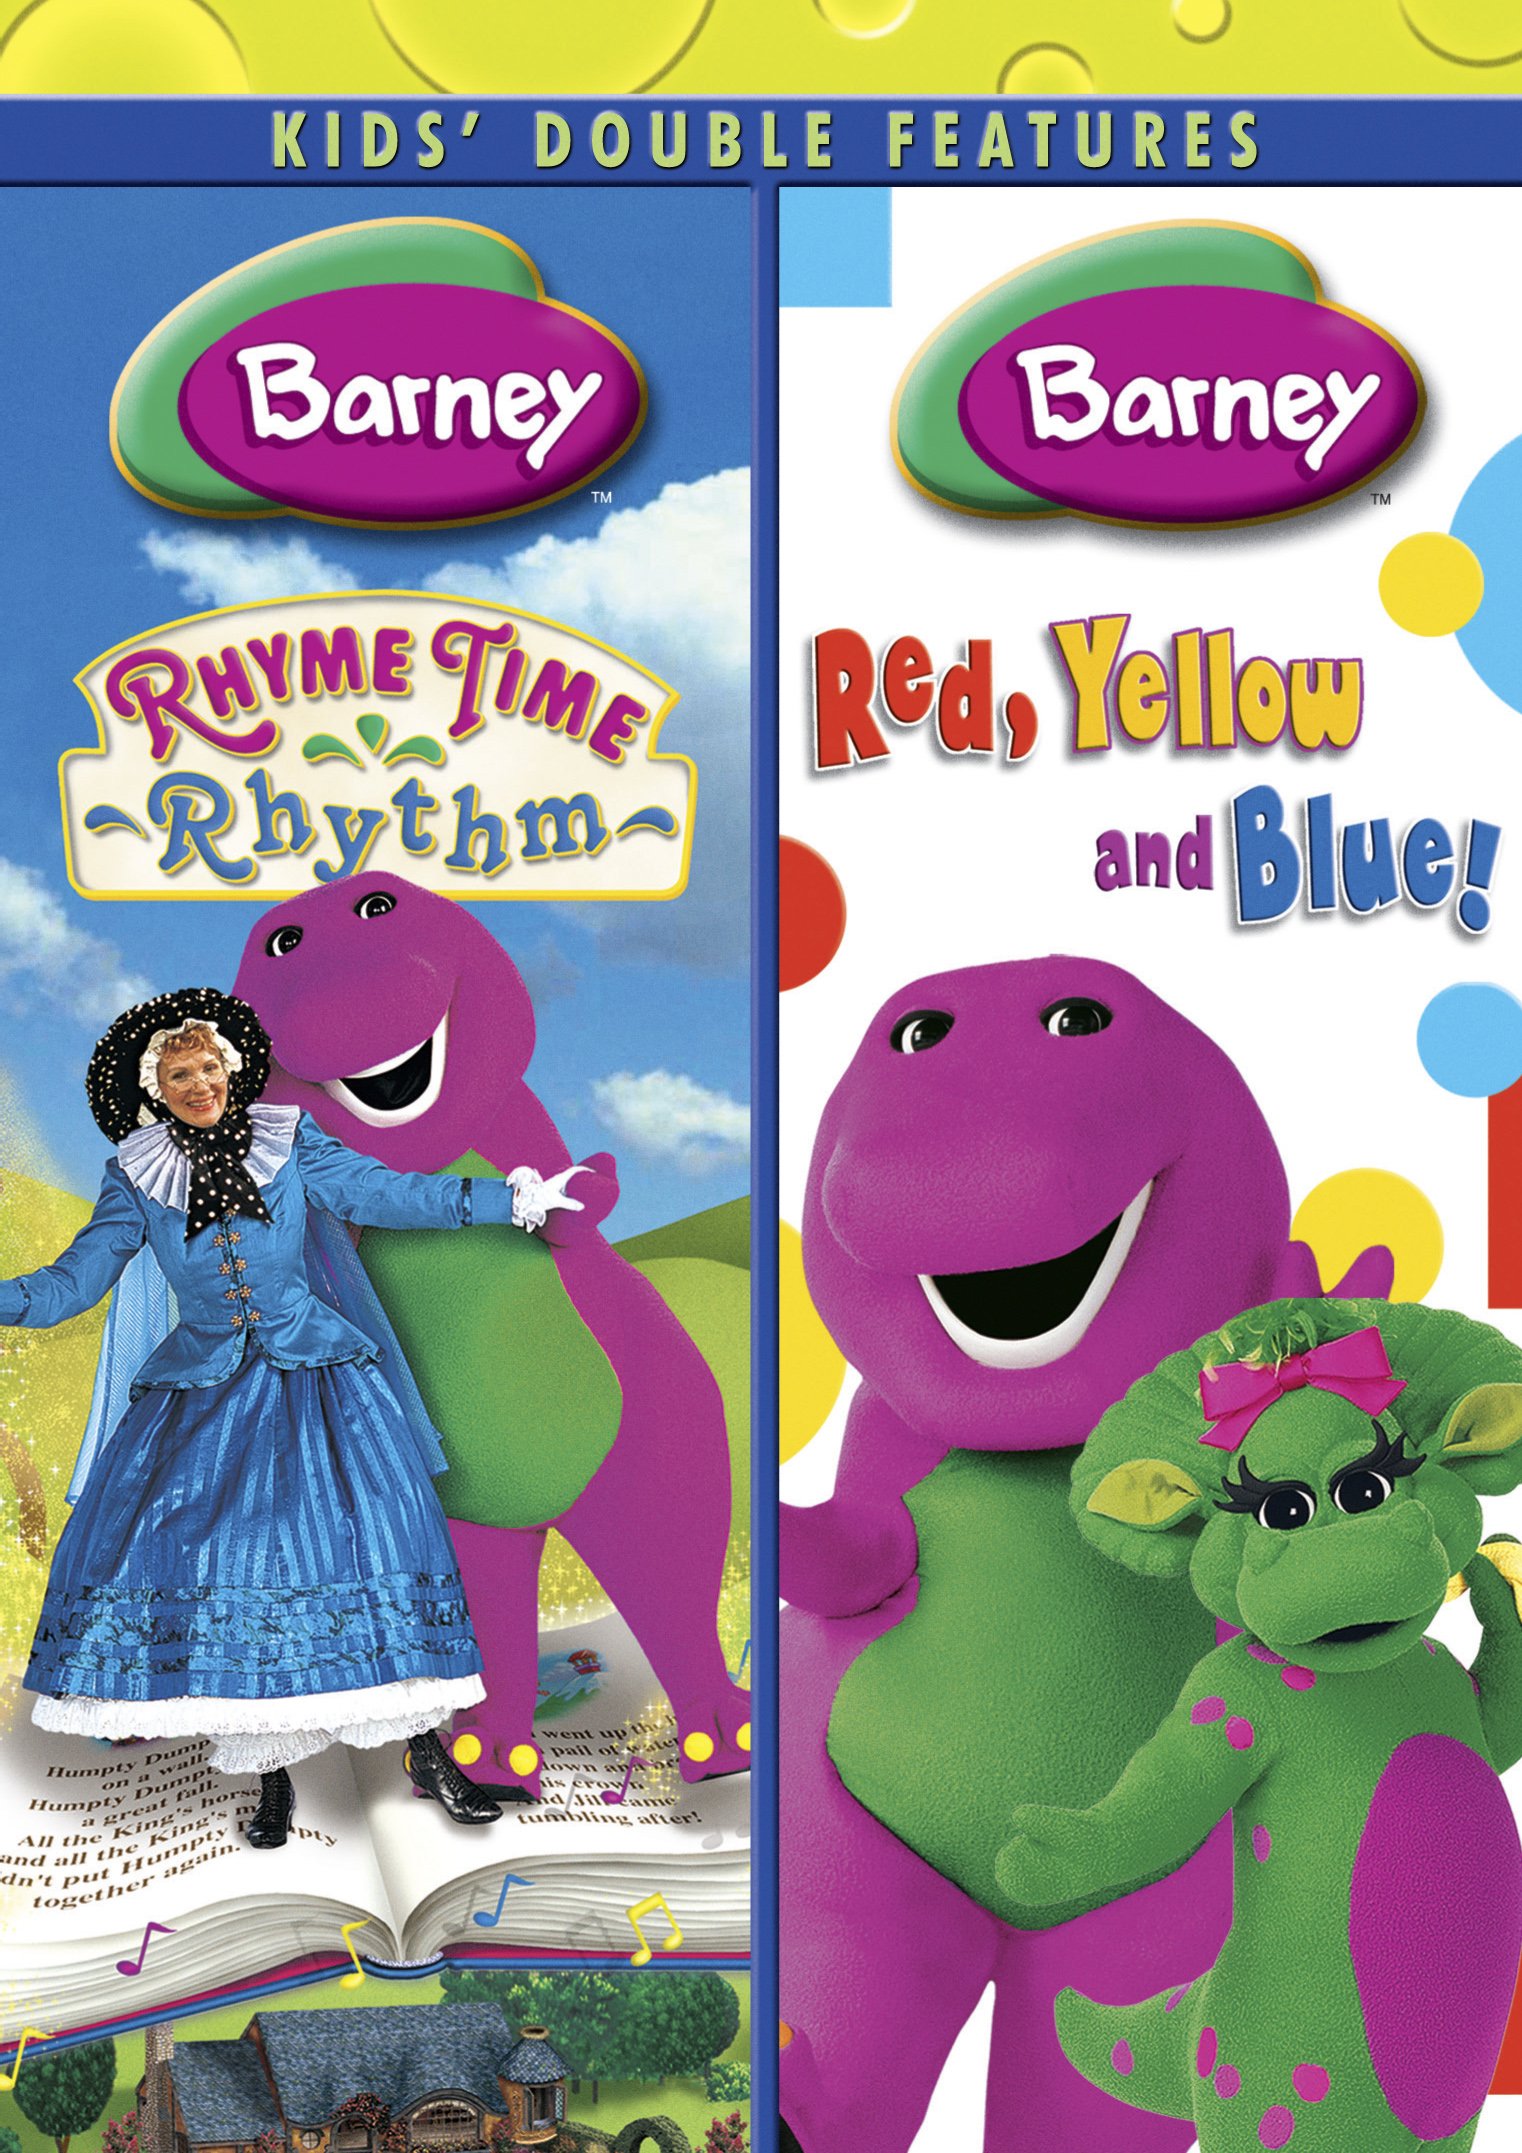 Barney: Rhyme Time Rhythm/Red Yellow Blue Double Feature